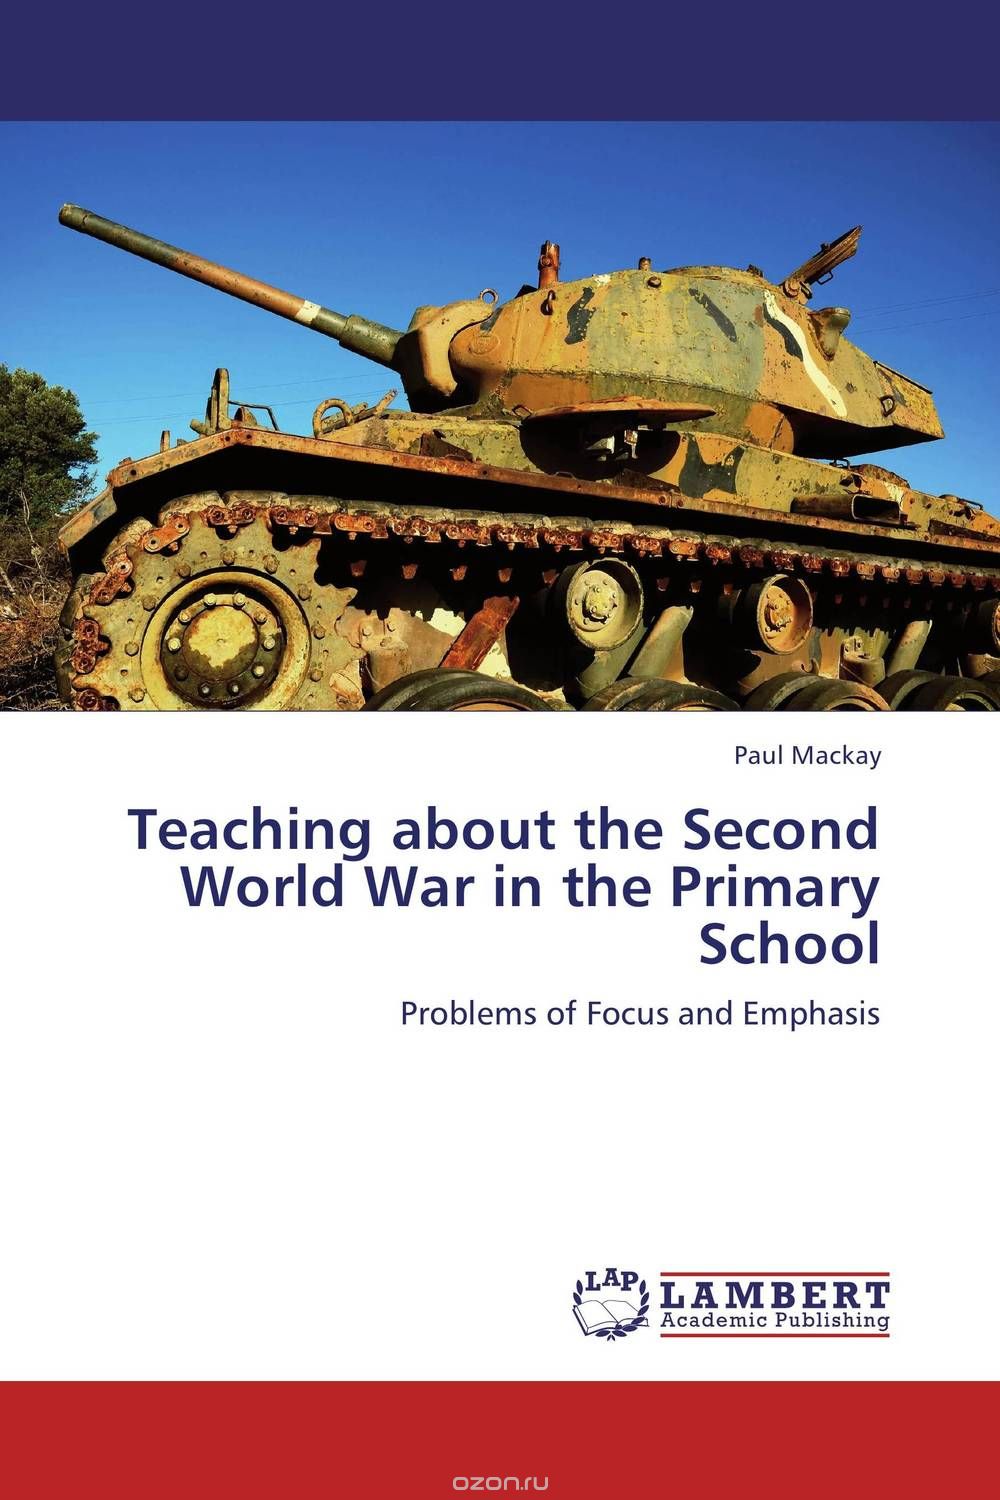 Teaching about the Second World War in the Primary School